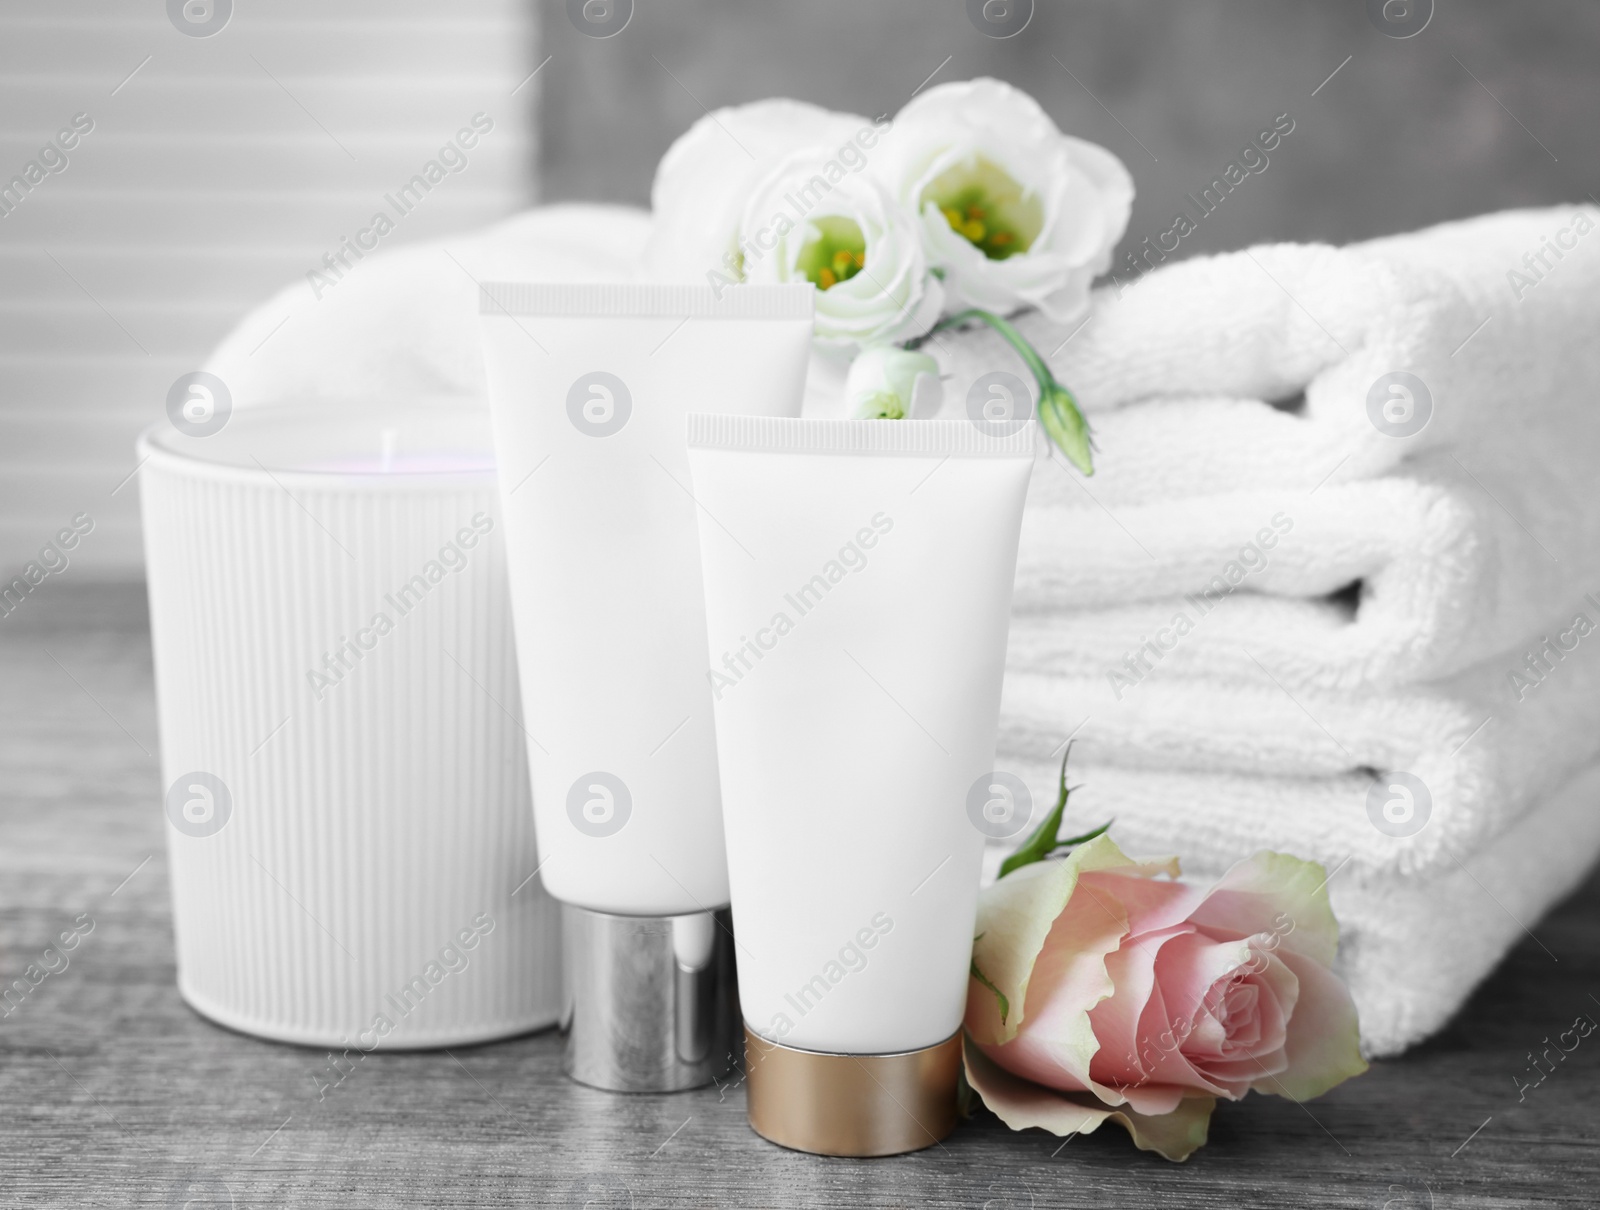 Photo of Cosmetic products, scented candle and folded towels with flowers on wooden table indoors